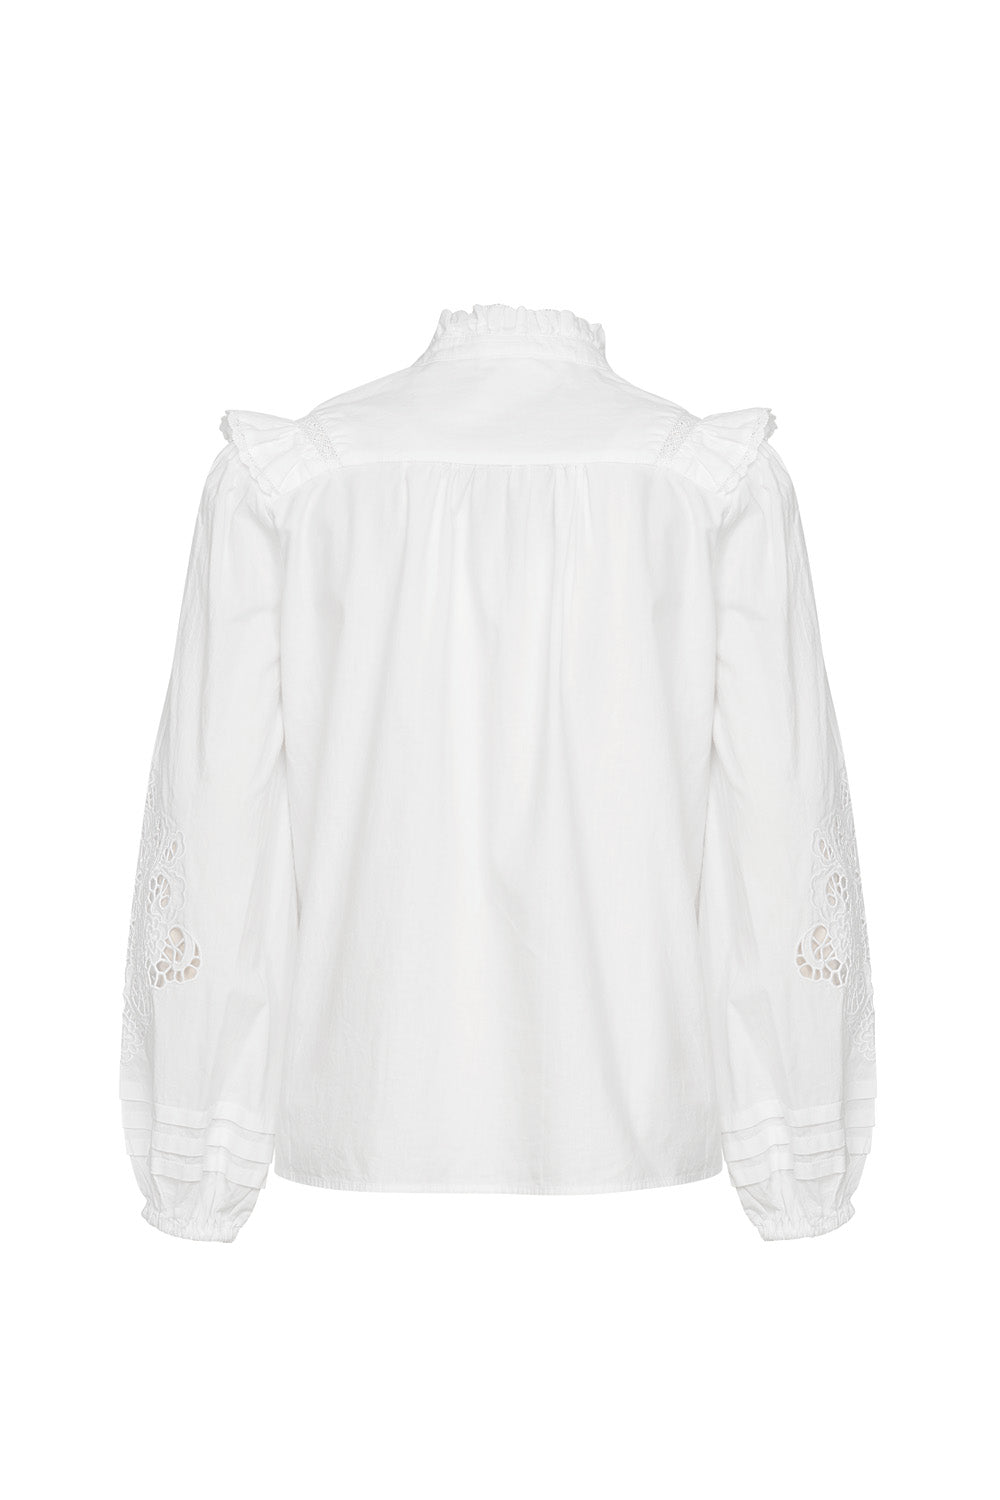 MAGGIE BLOUSE